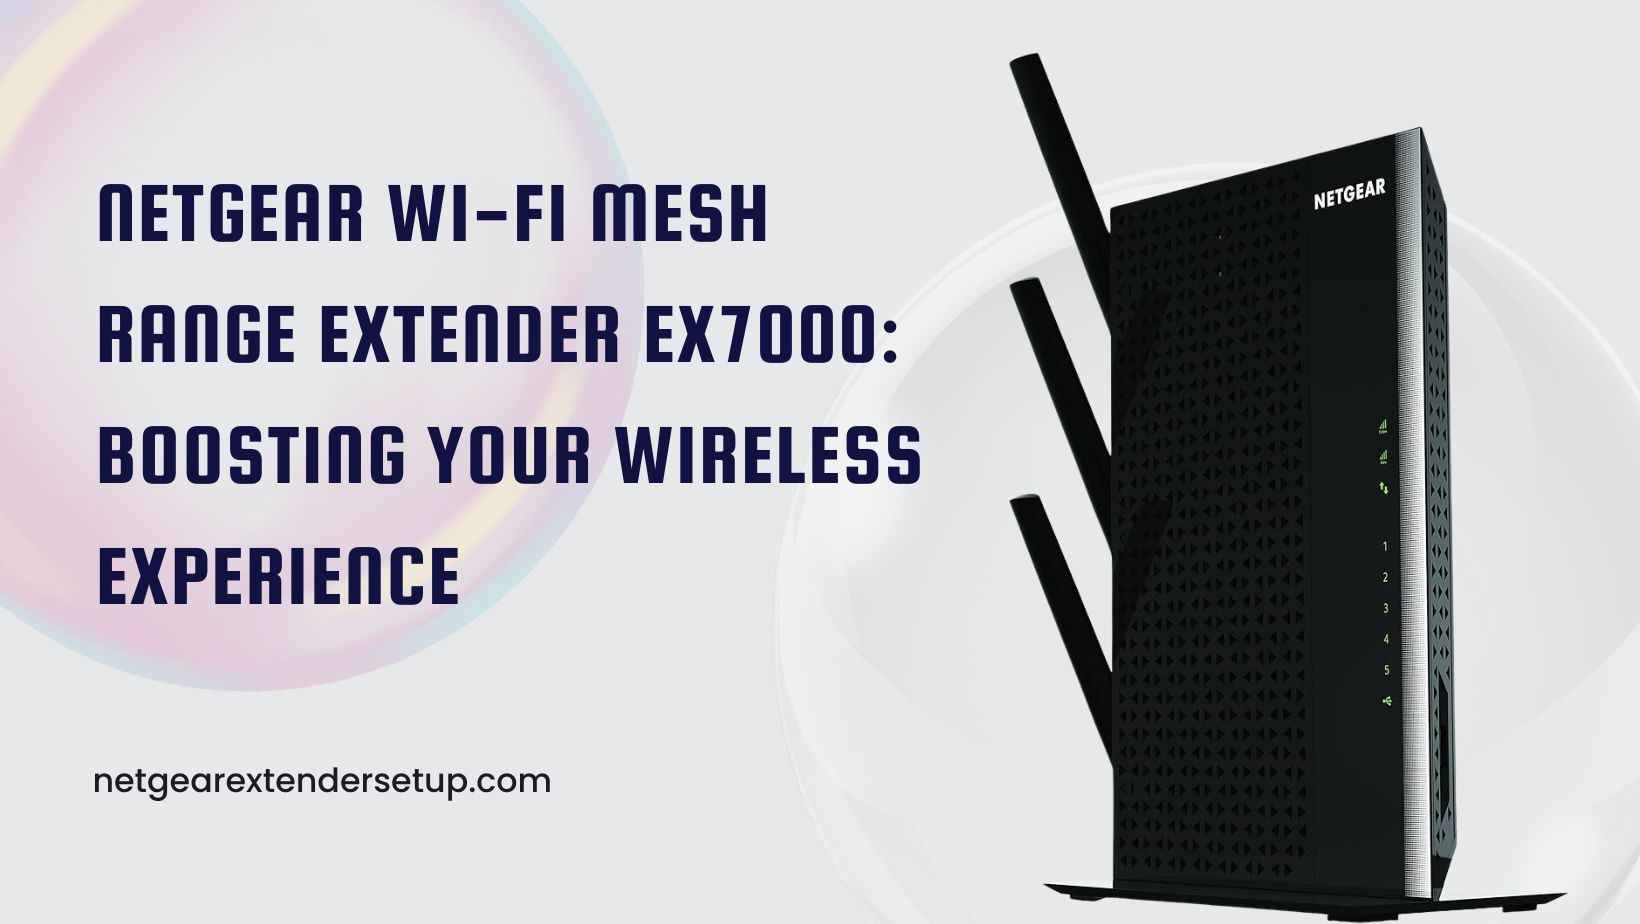 You are currently viewing Netgear Wi-Fi Mesh Range Extender EX7000: Boosting Your Wireless Experience